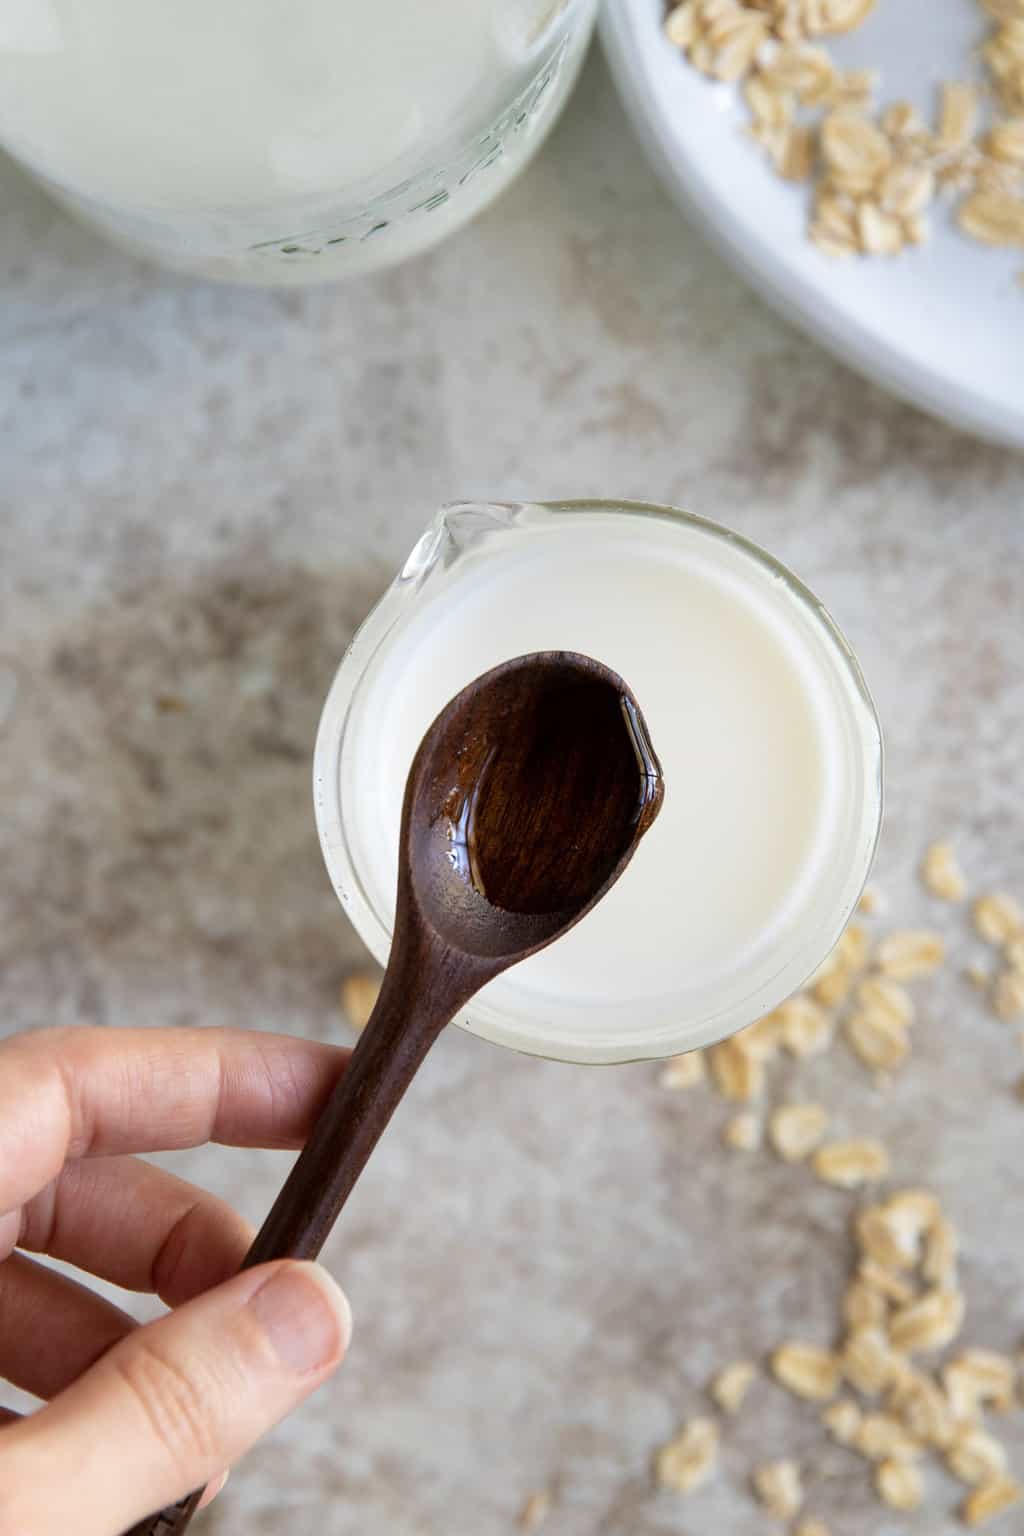 Combine oat milk and glycerin for DIY oatmeal lotion recipe